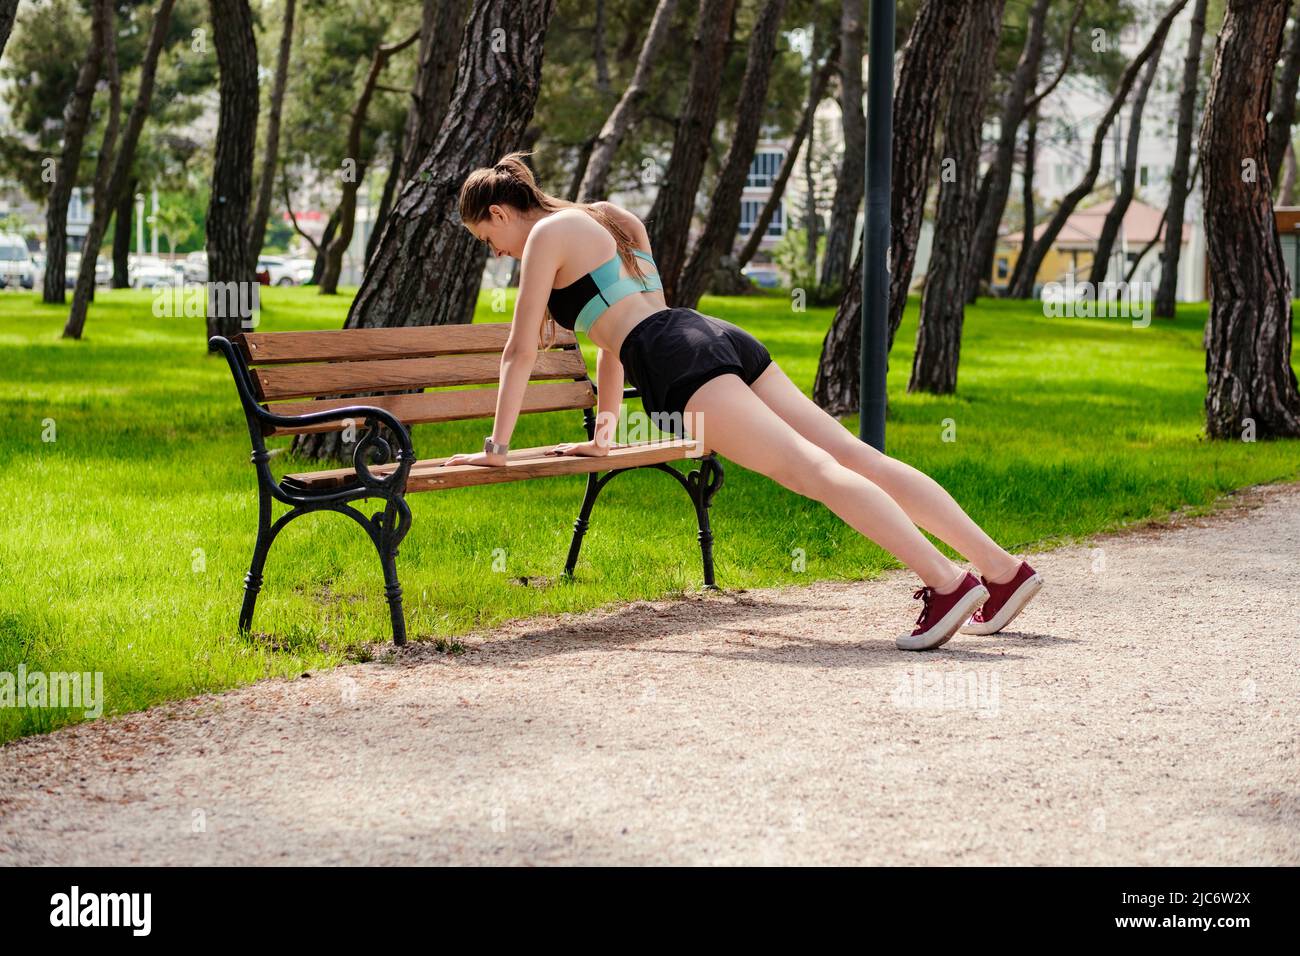 Young Woman in Sports Bra Laying on Bench Stock Photo - Image of